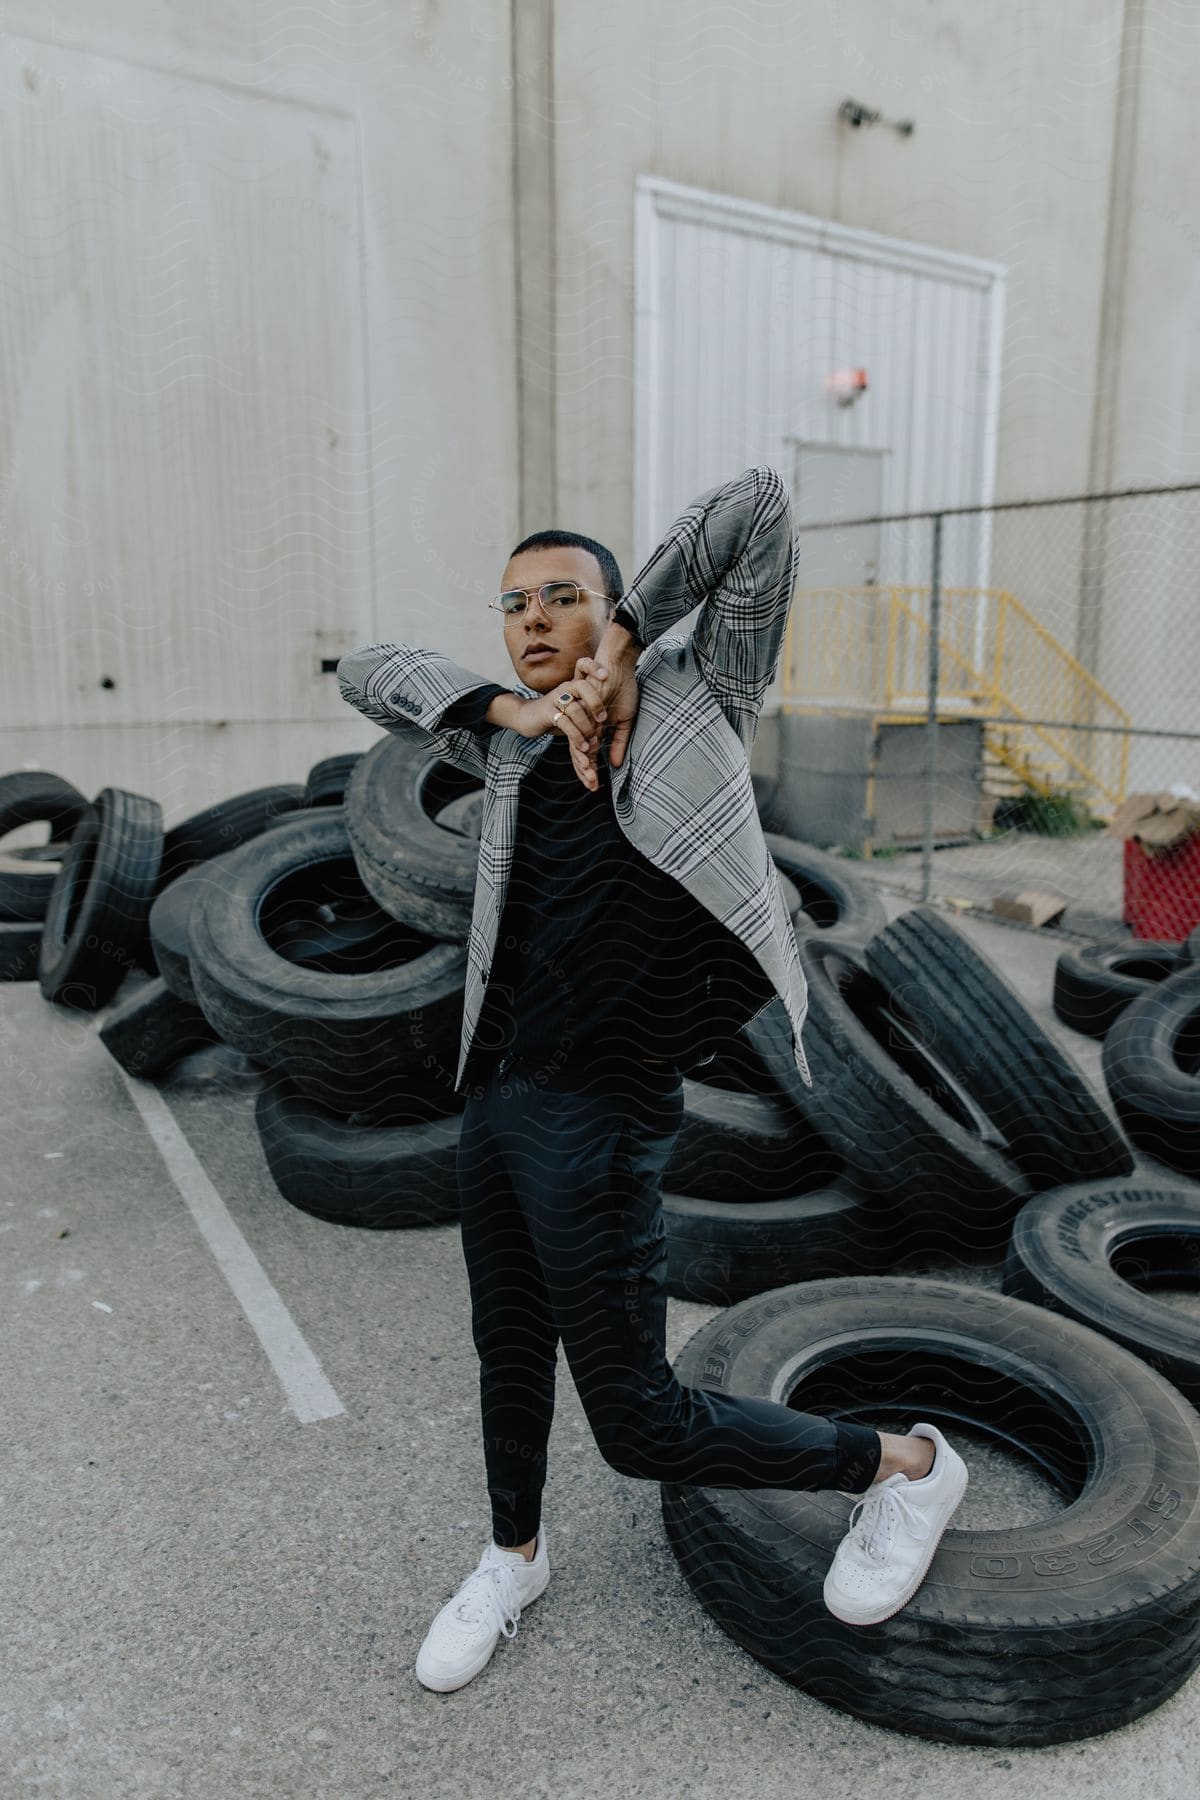 A man posing in a parking lot with tires lying on the ground.